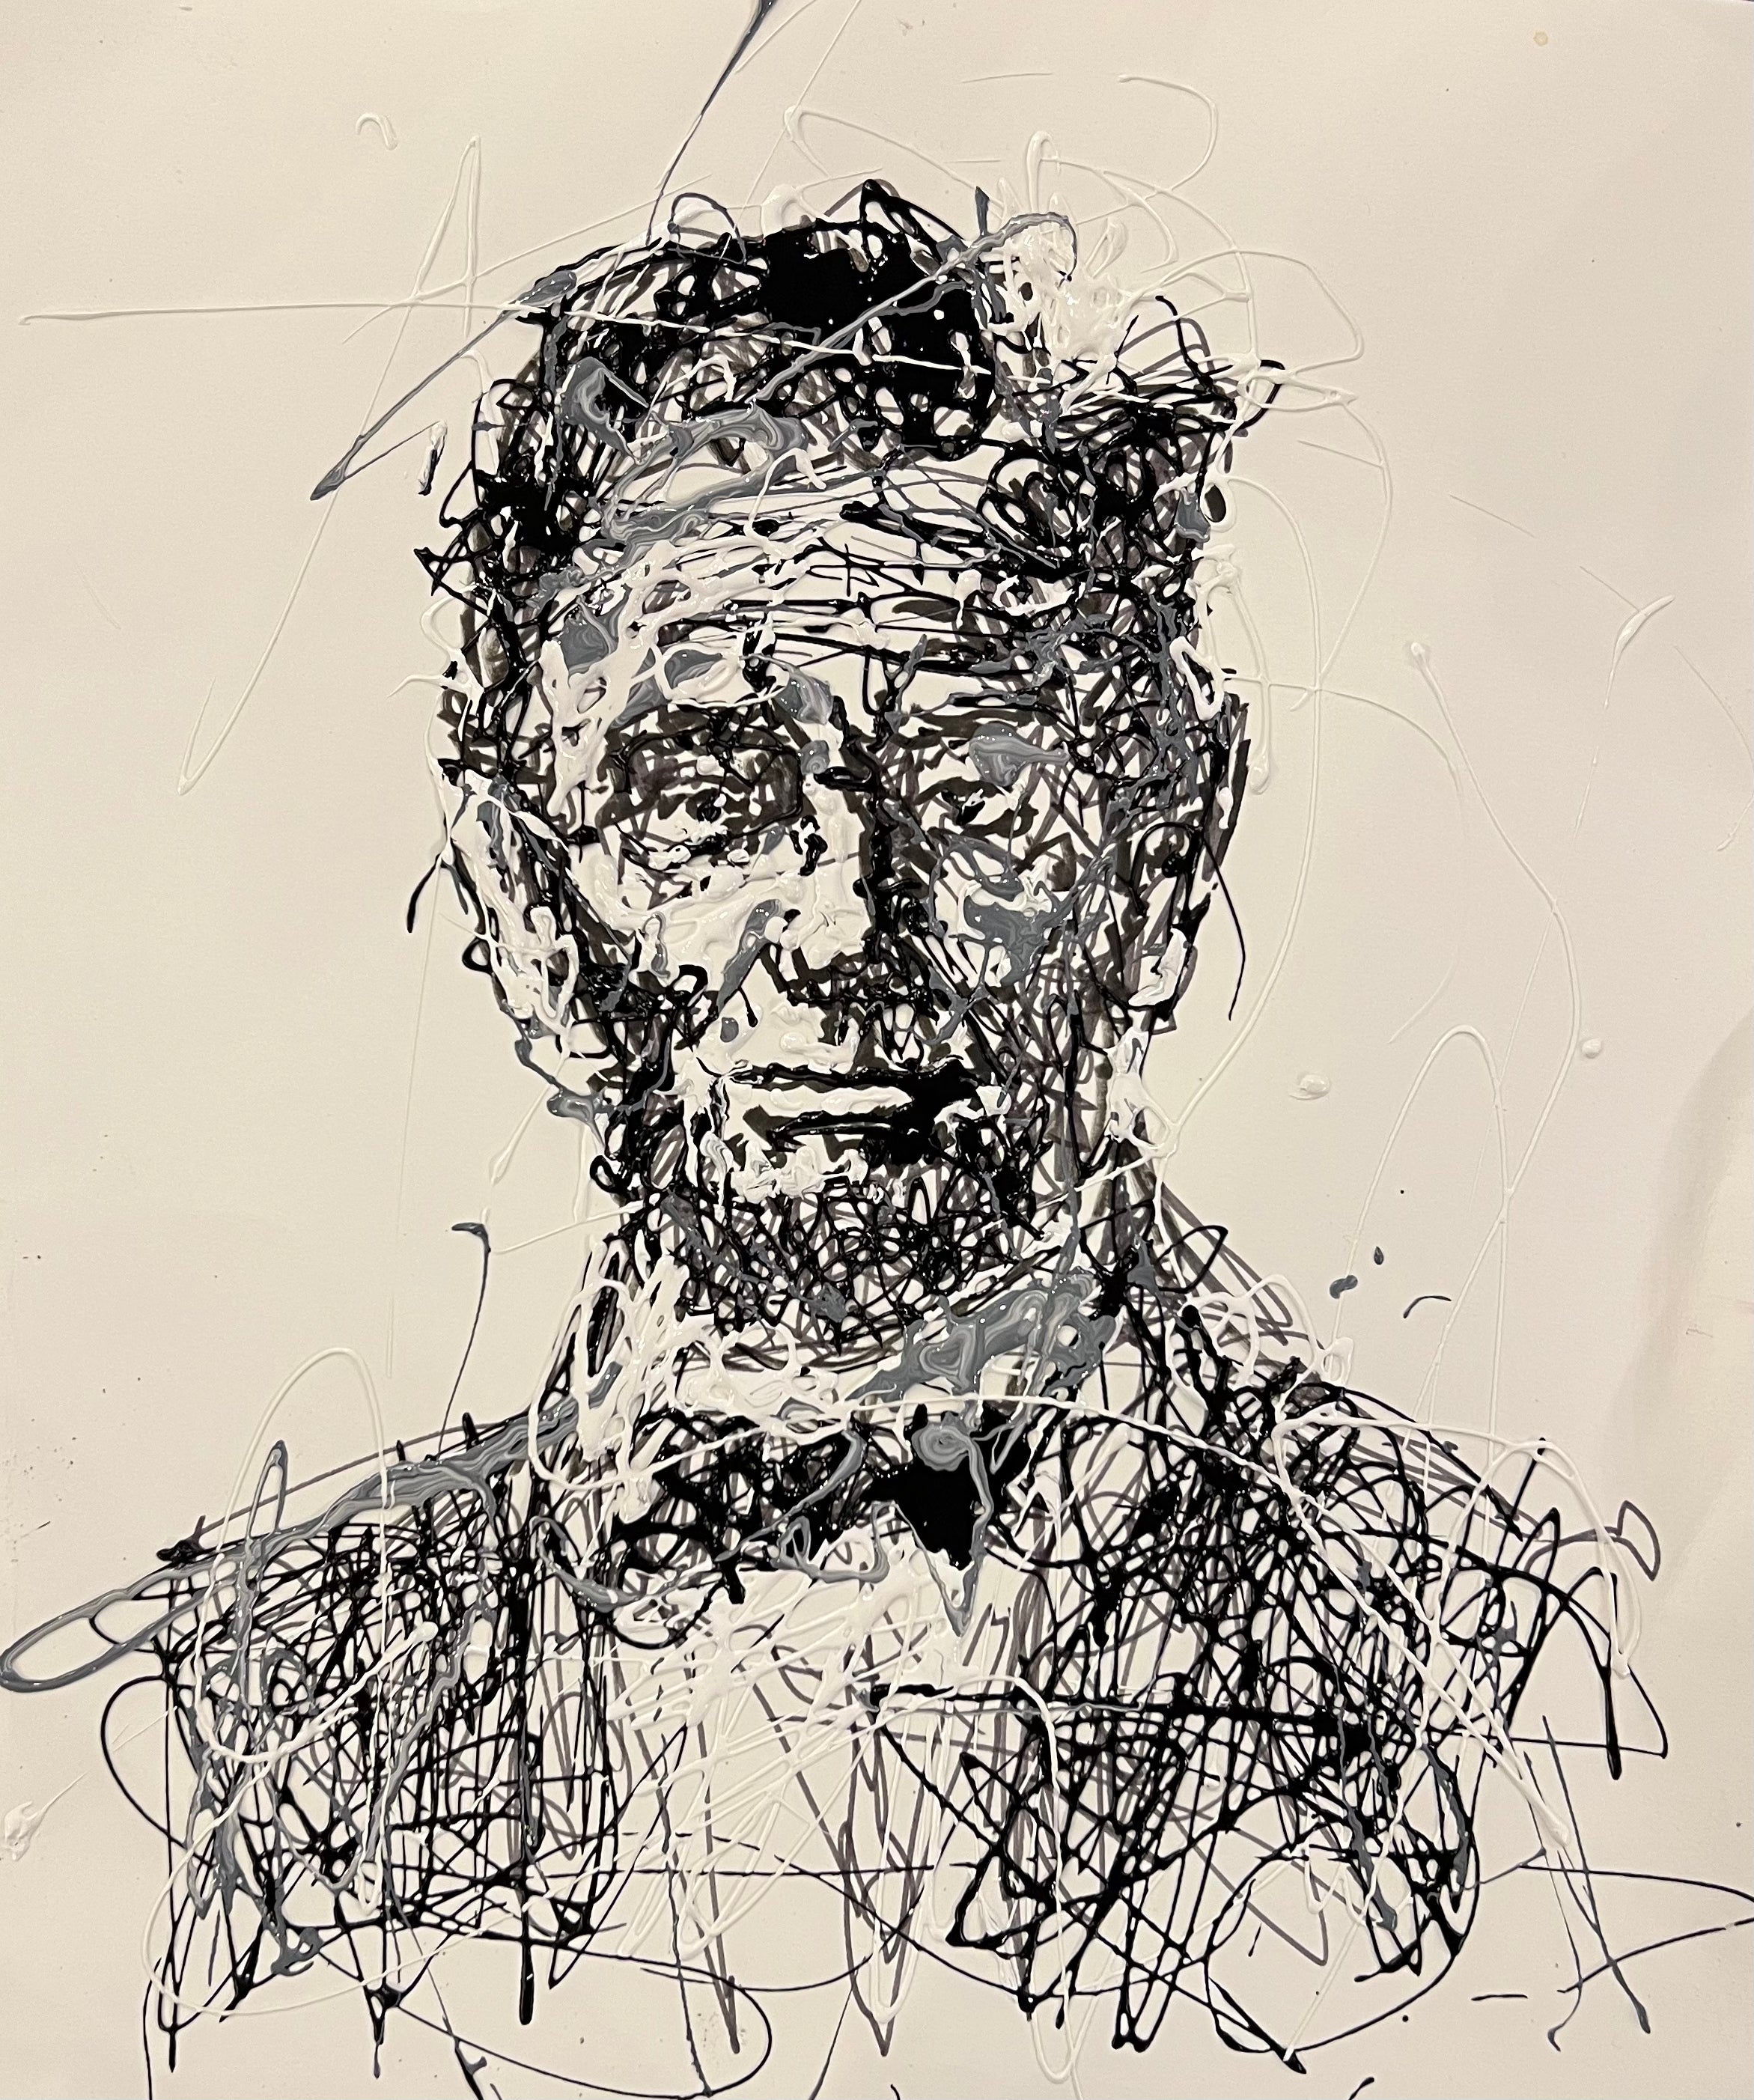 Abe Lincoln on paper